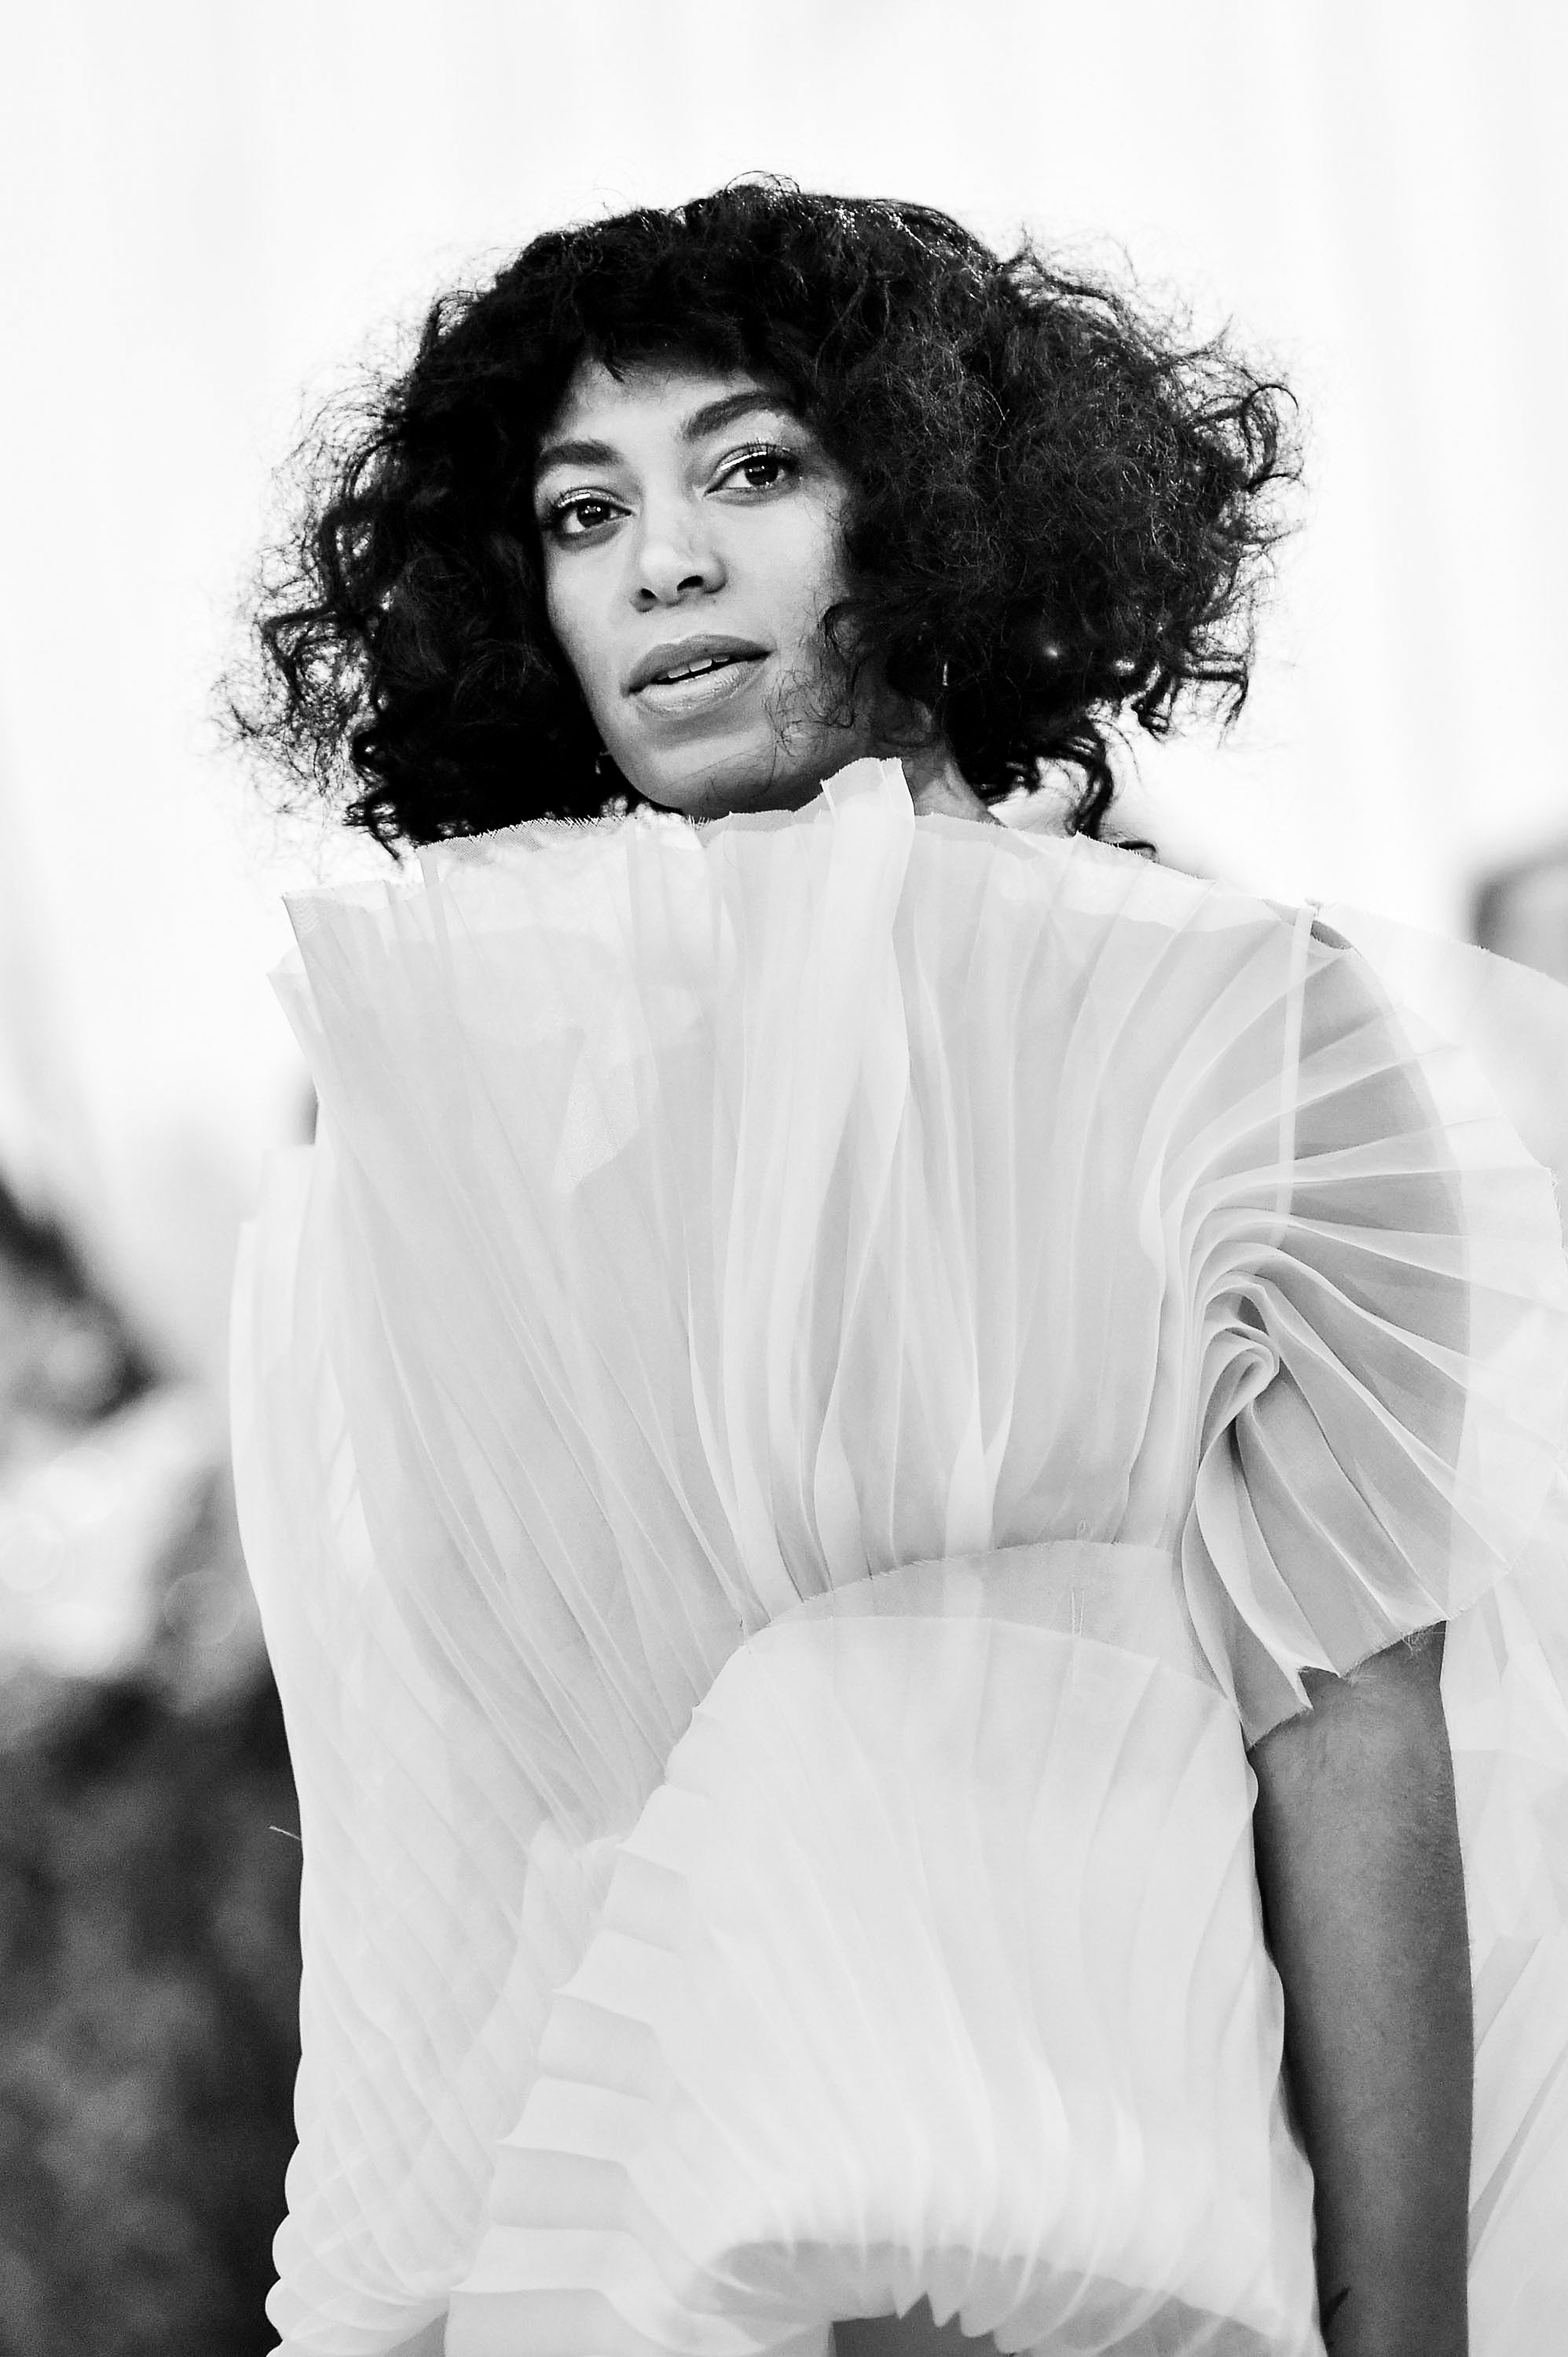 Solange Responds to Fan Who Questions Why Her Son Speaks French